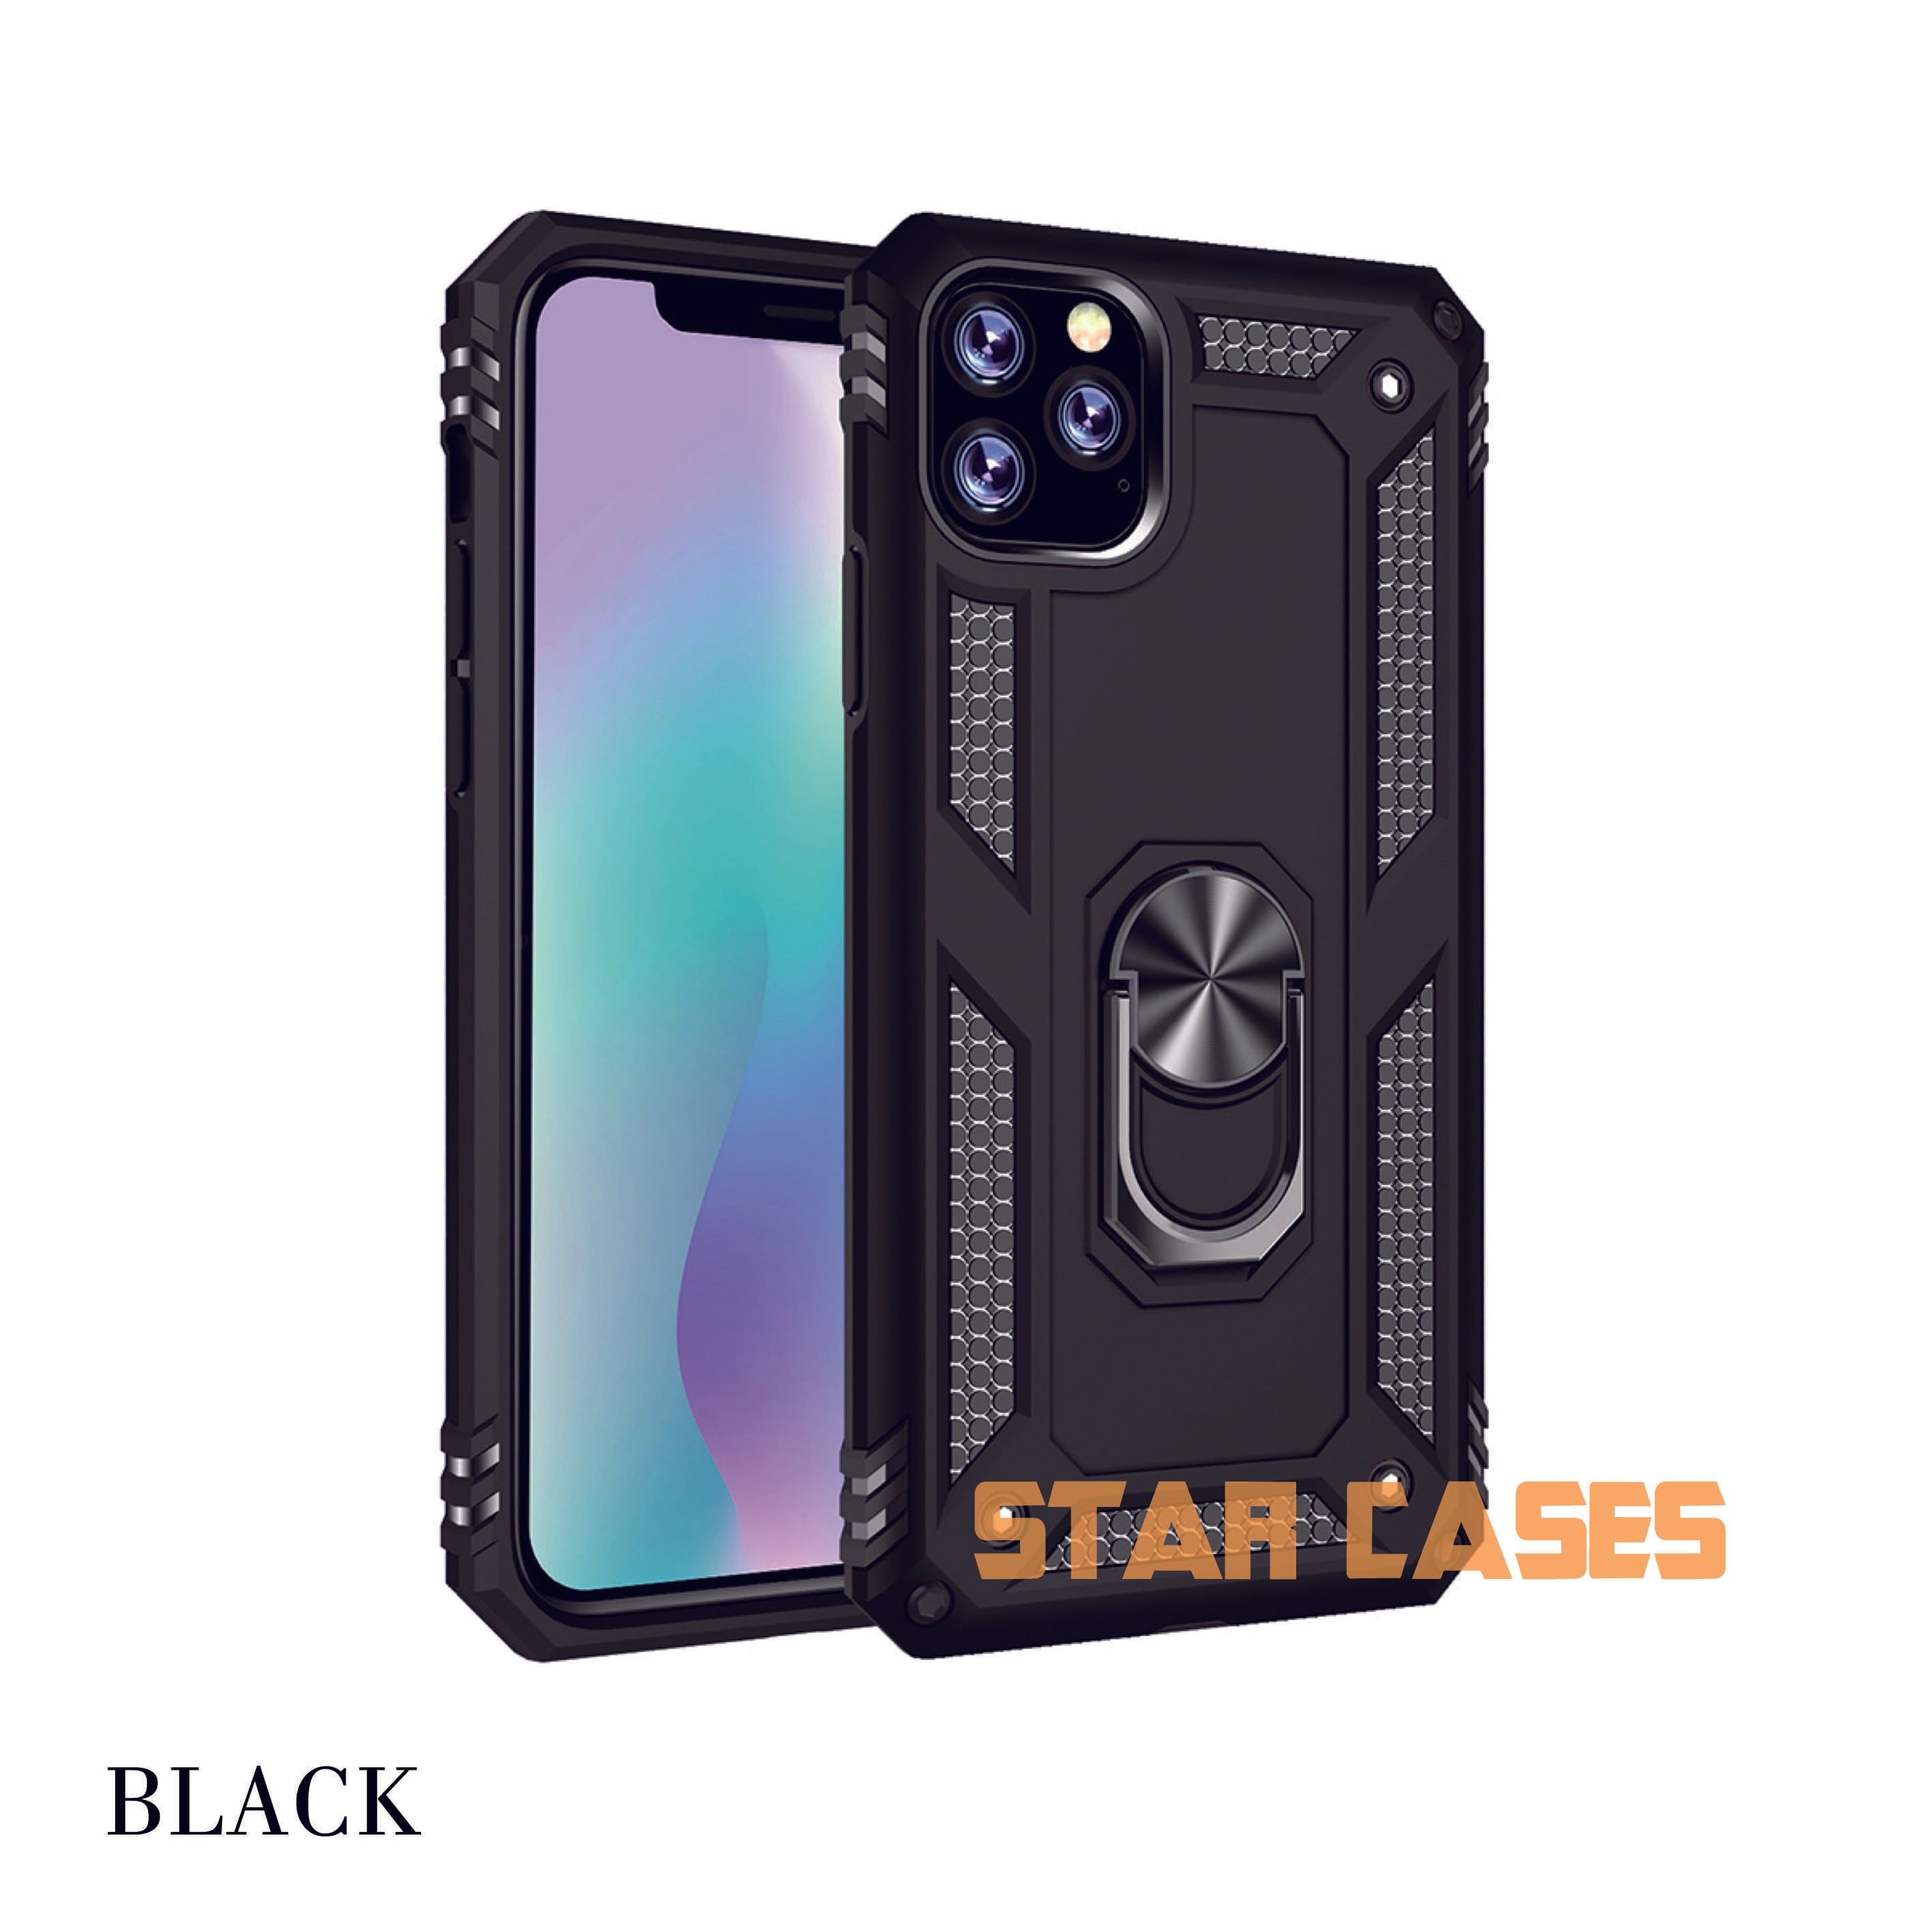 Samsung S9 Plus Military Ring Holder Magnetic Case